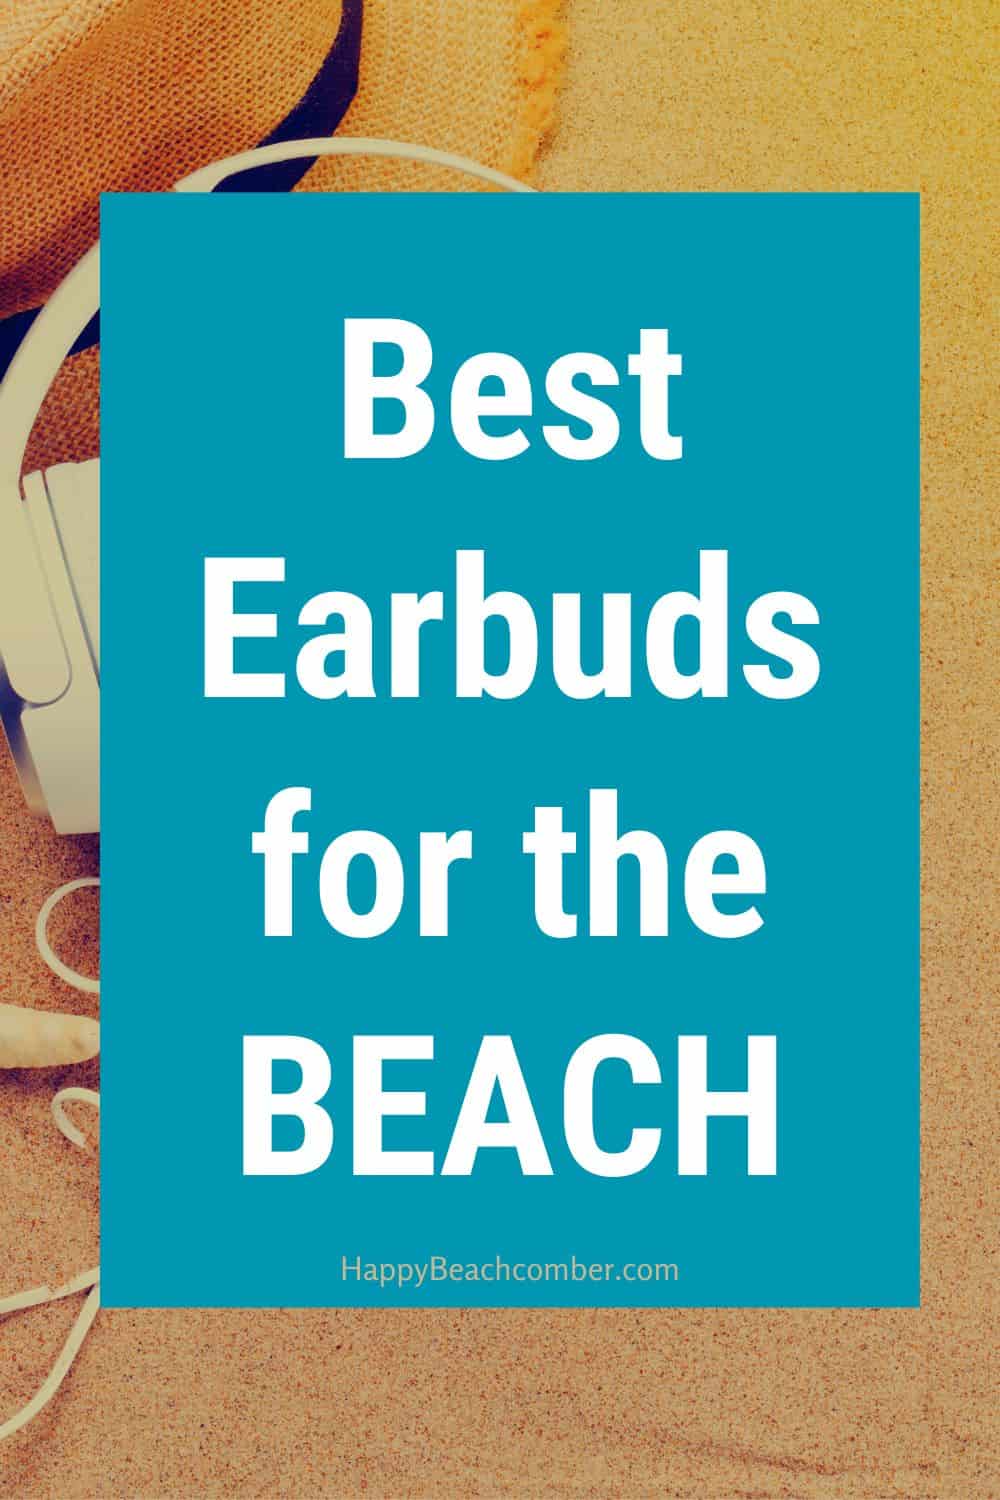 Best Earbuds for the Beach